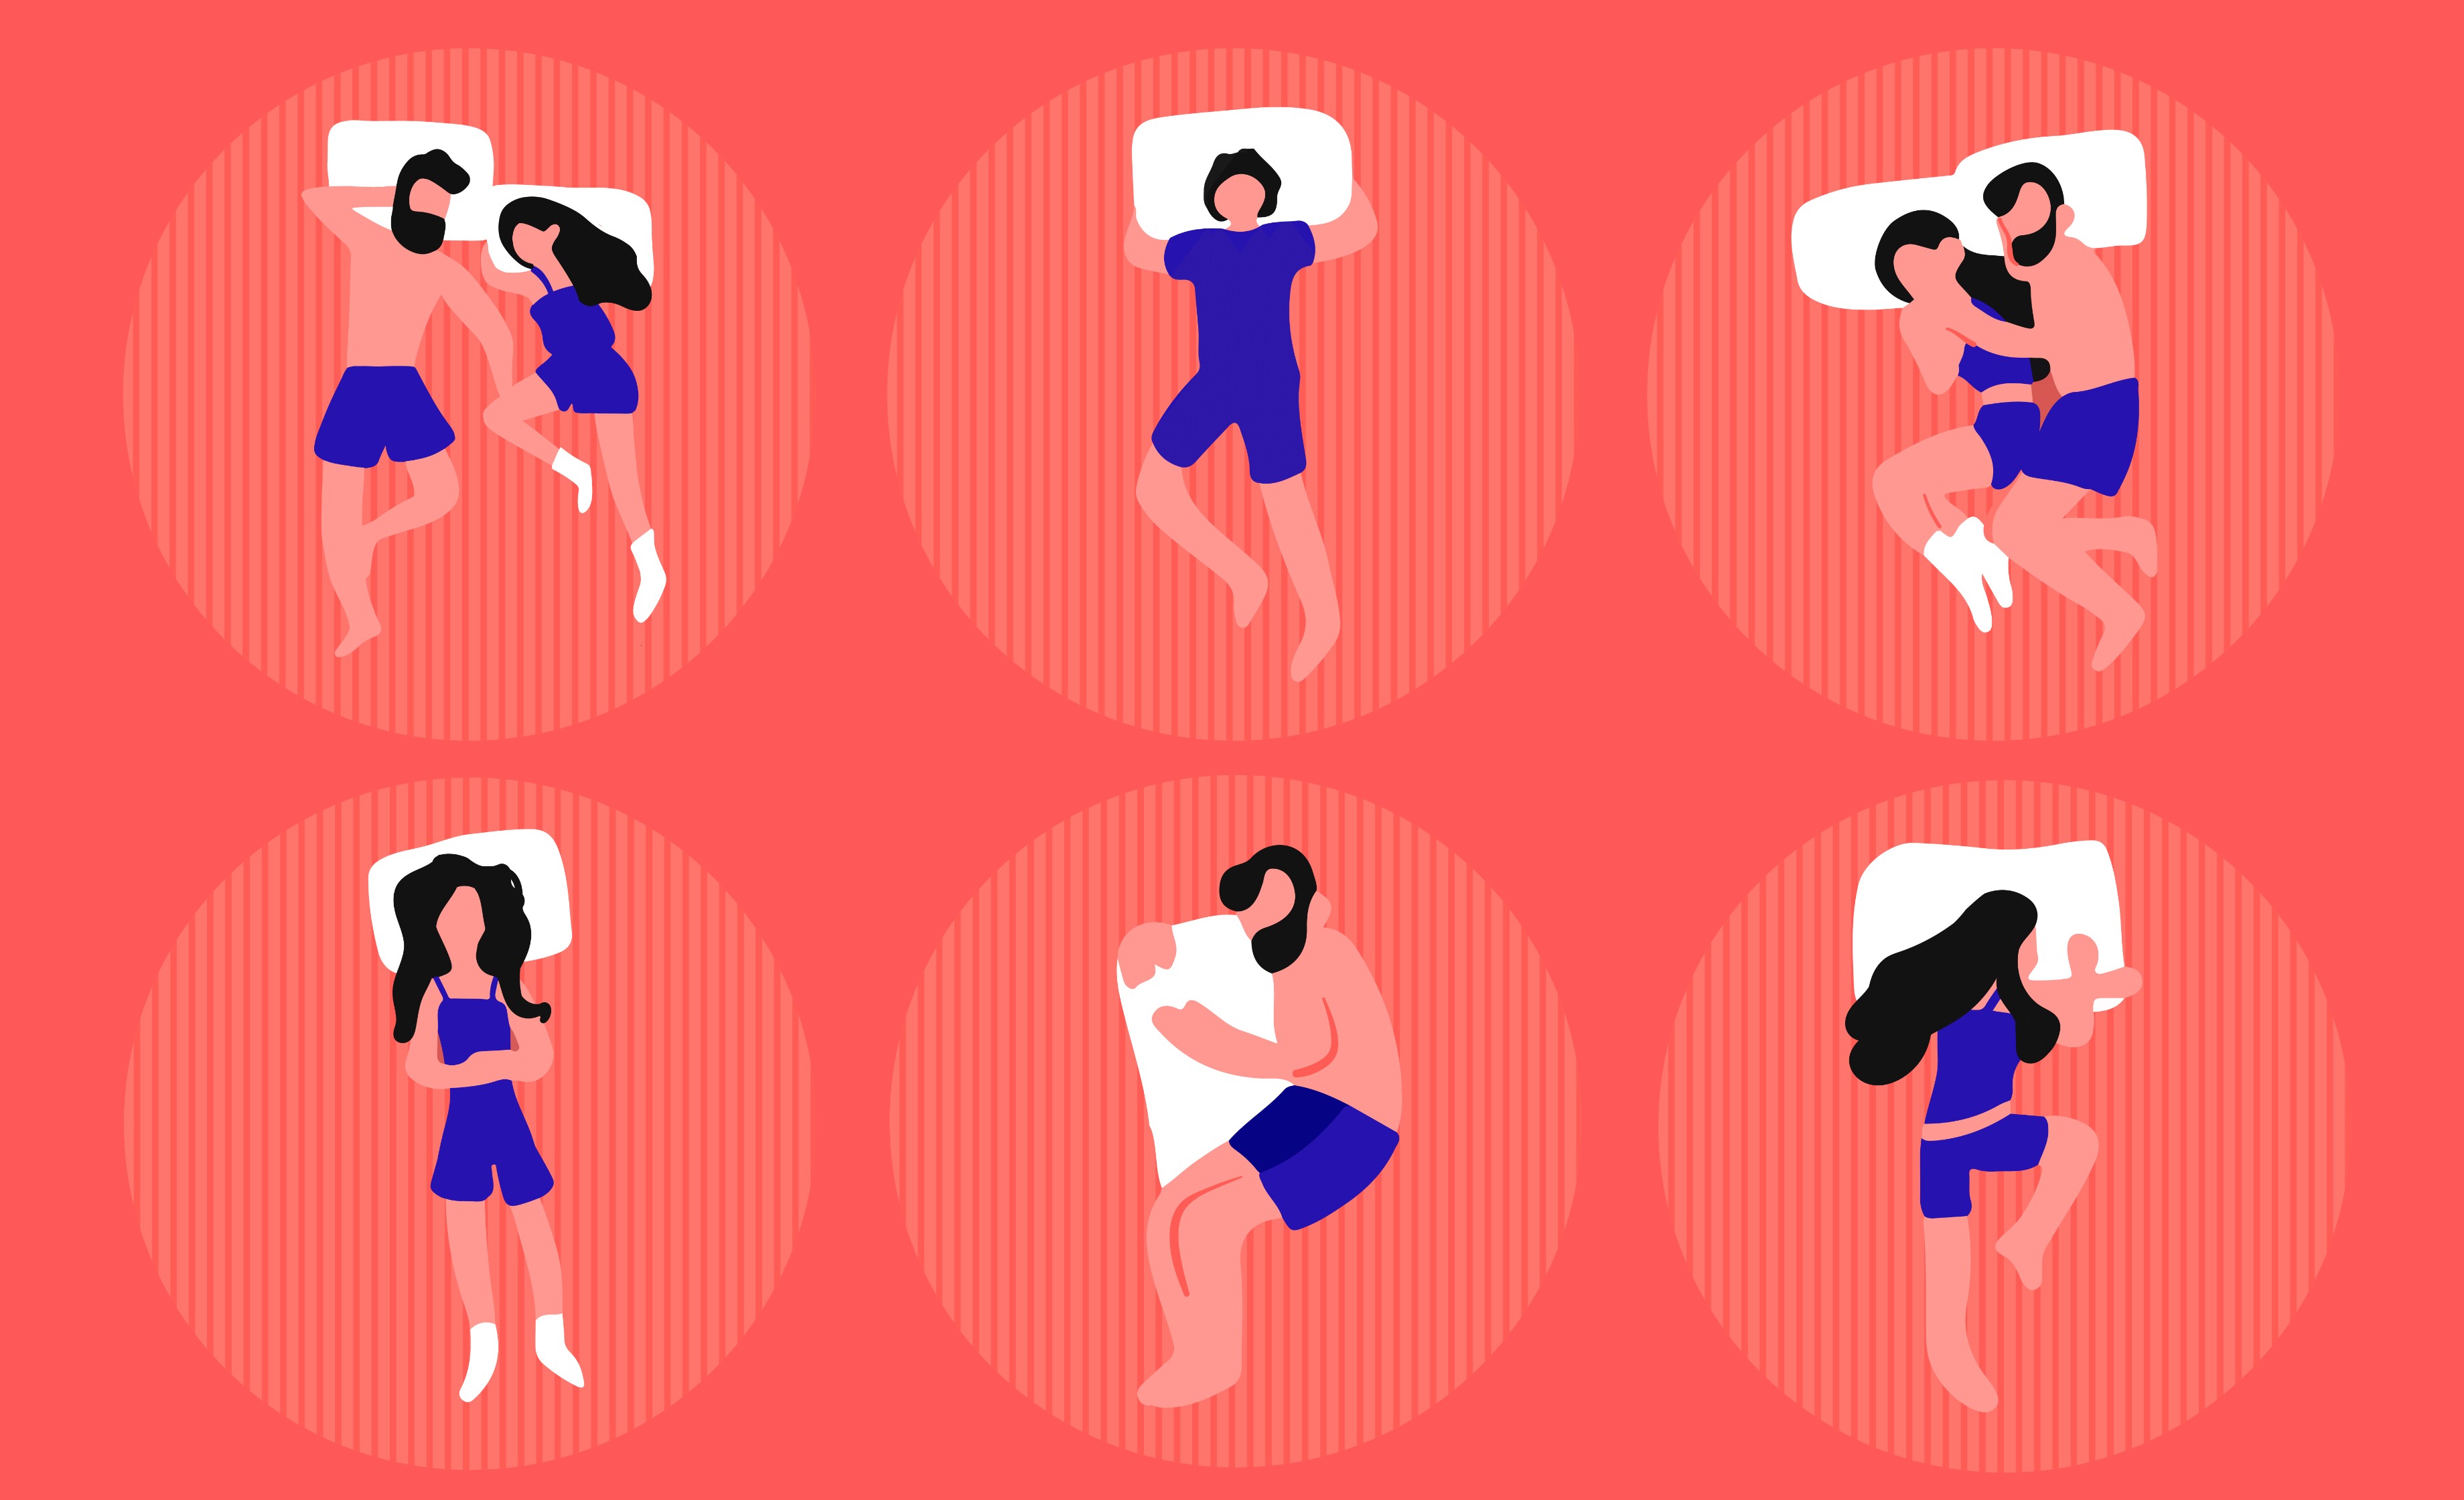 People in different sleeping positions. Clockwise from top left: chasing spoon, stargazer, spoon, yearner, pillow-hugger, corpse sleeping position.